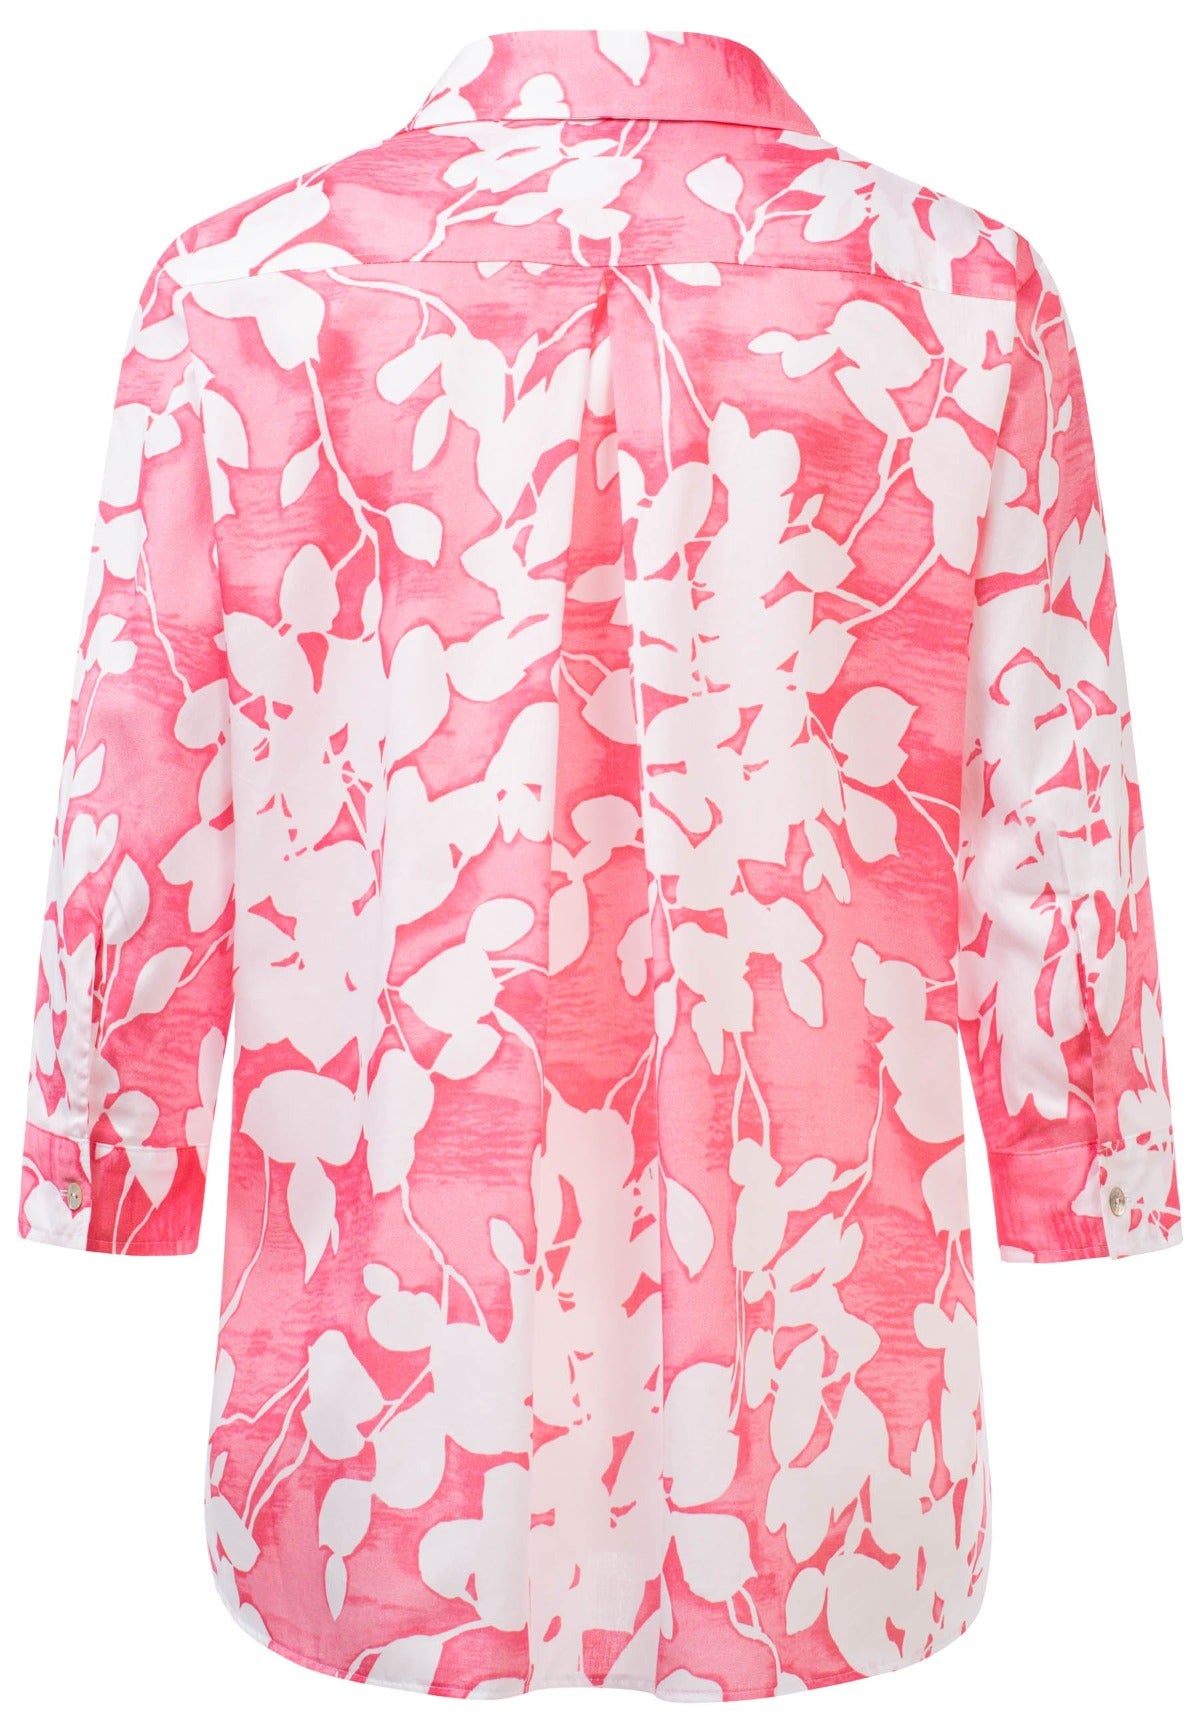 Just White Pink Floral Shirt J1926